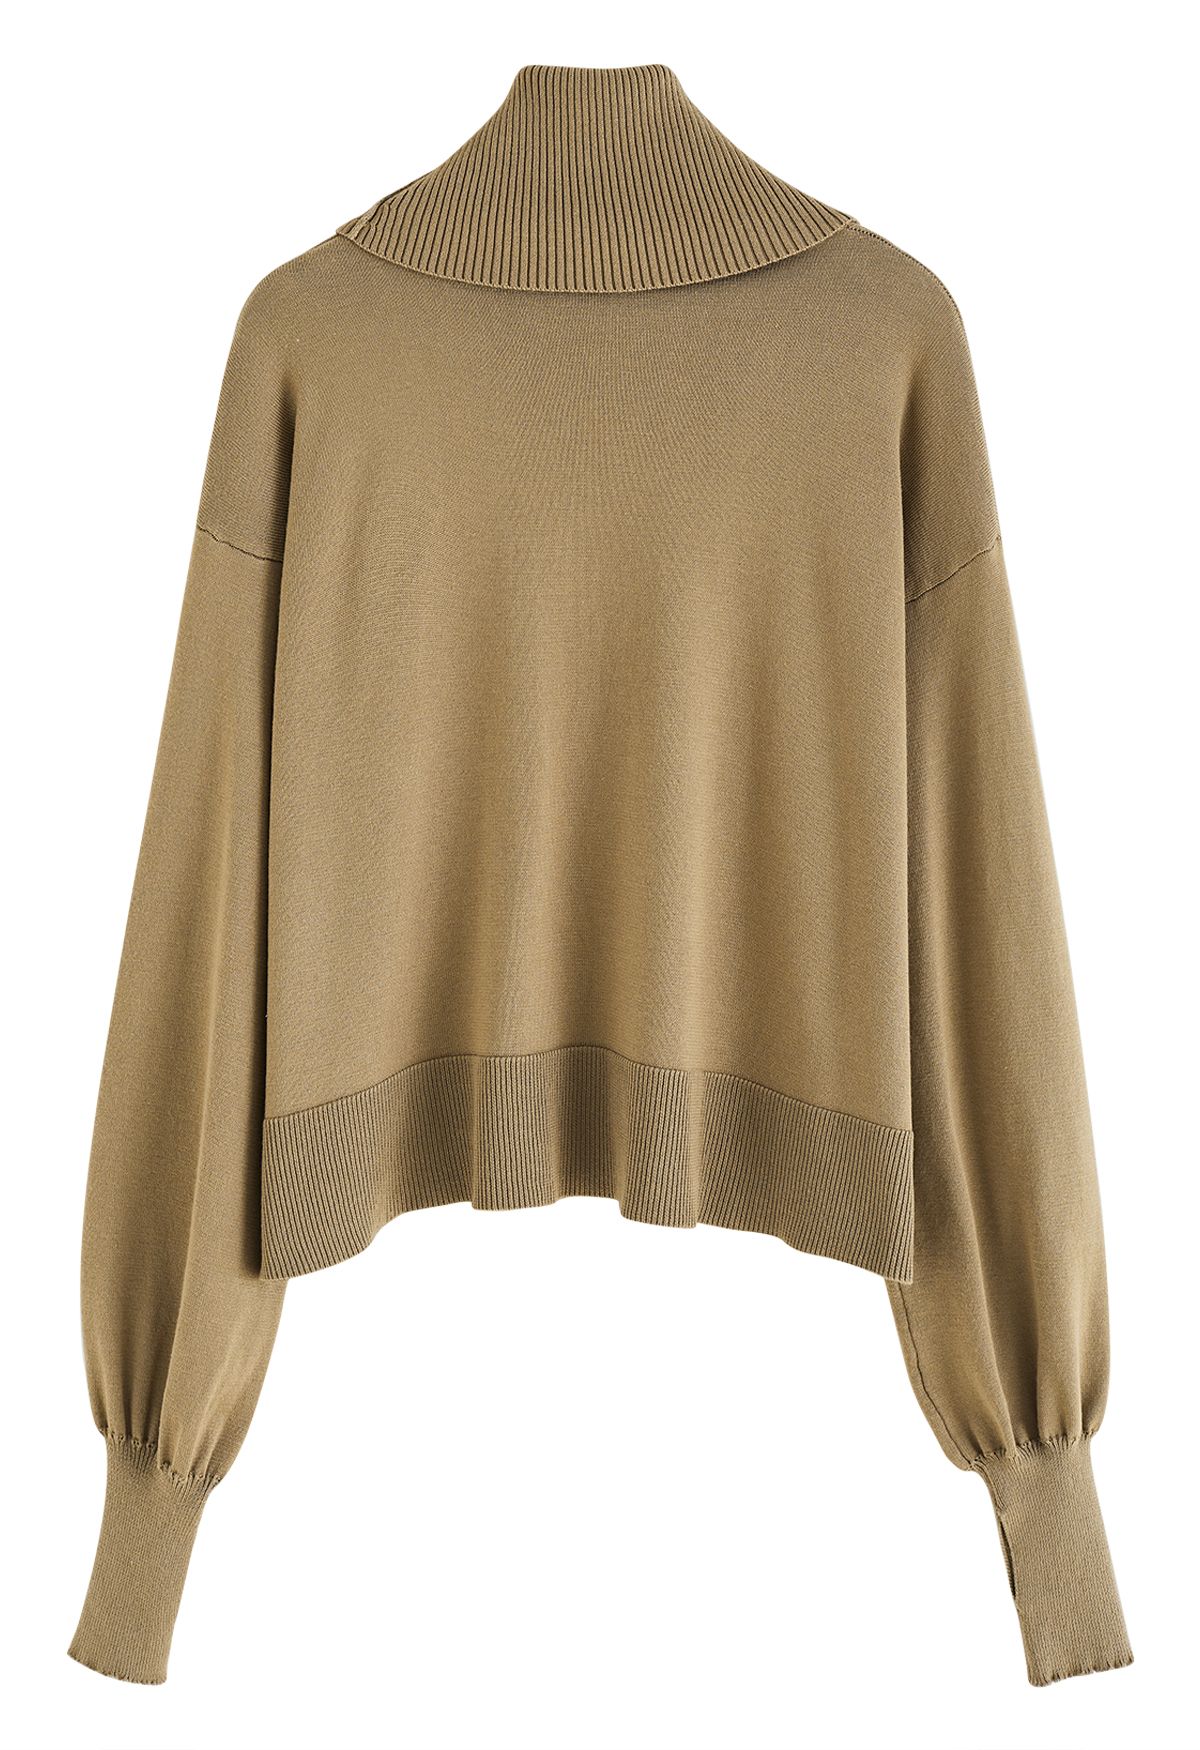 Turtleneck Side Buttons Slouchy Knit Top in Khaki